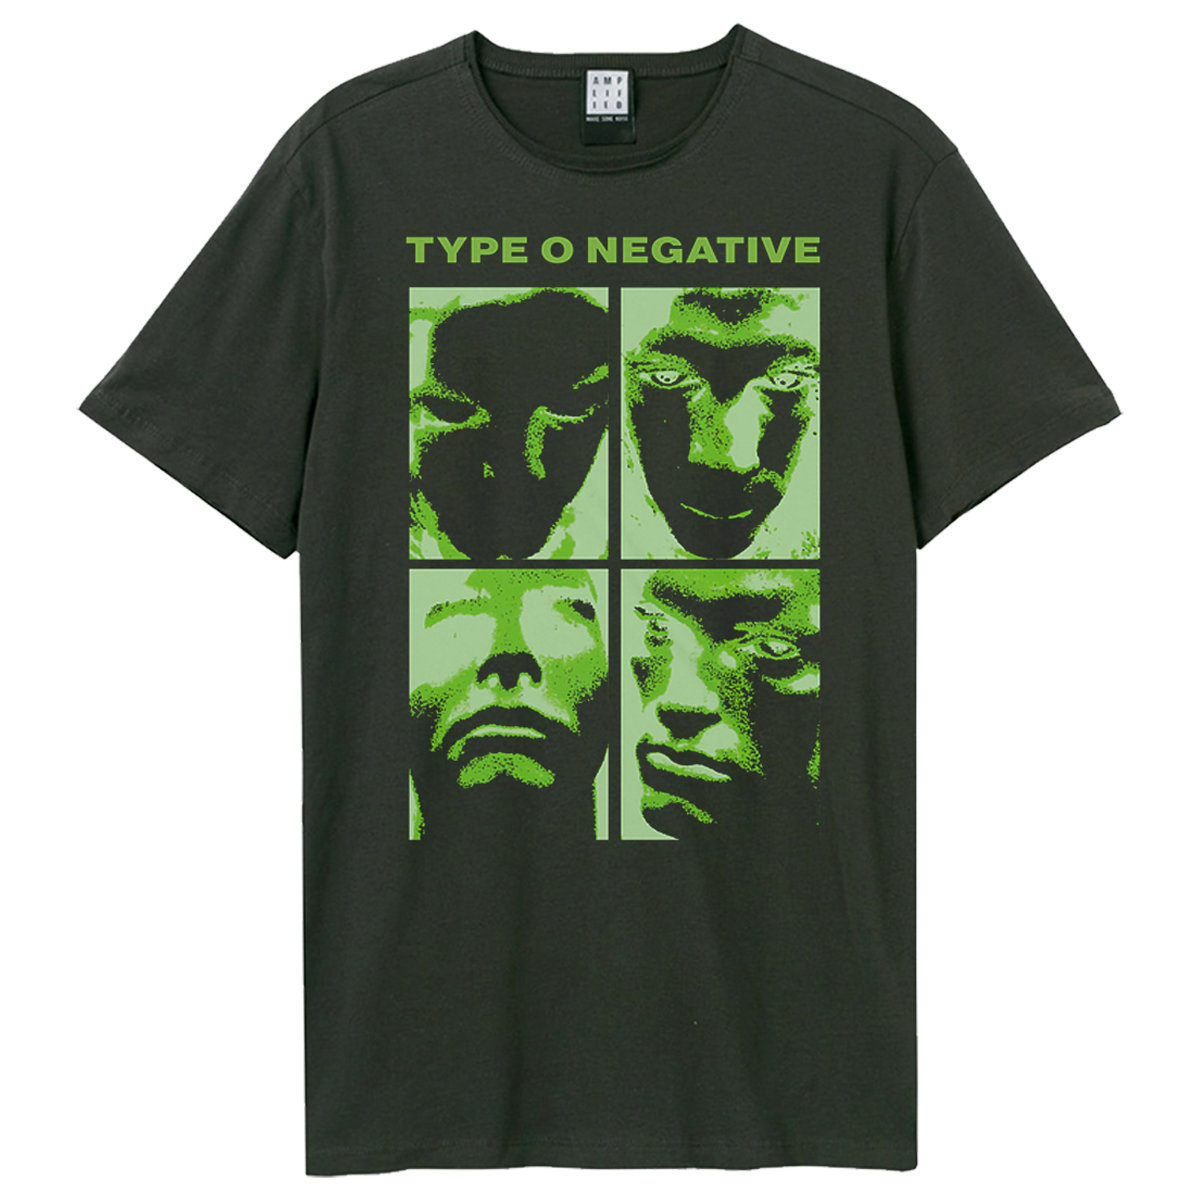 https://www.amplifiedclothing.com/uploads/images/products/verylarge/amplified_typeonegative_typeonegativewarpedfaces_1703760501ZAVE210M280_CC_1.jpg